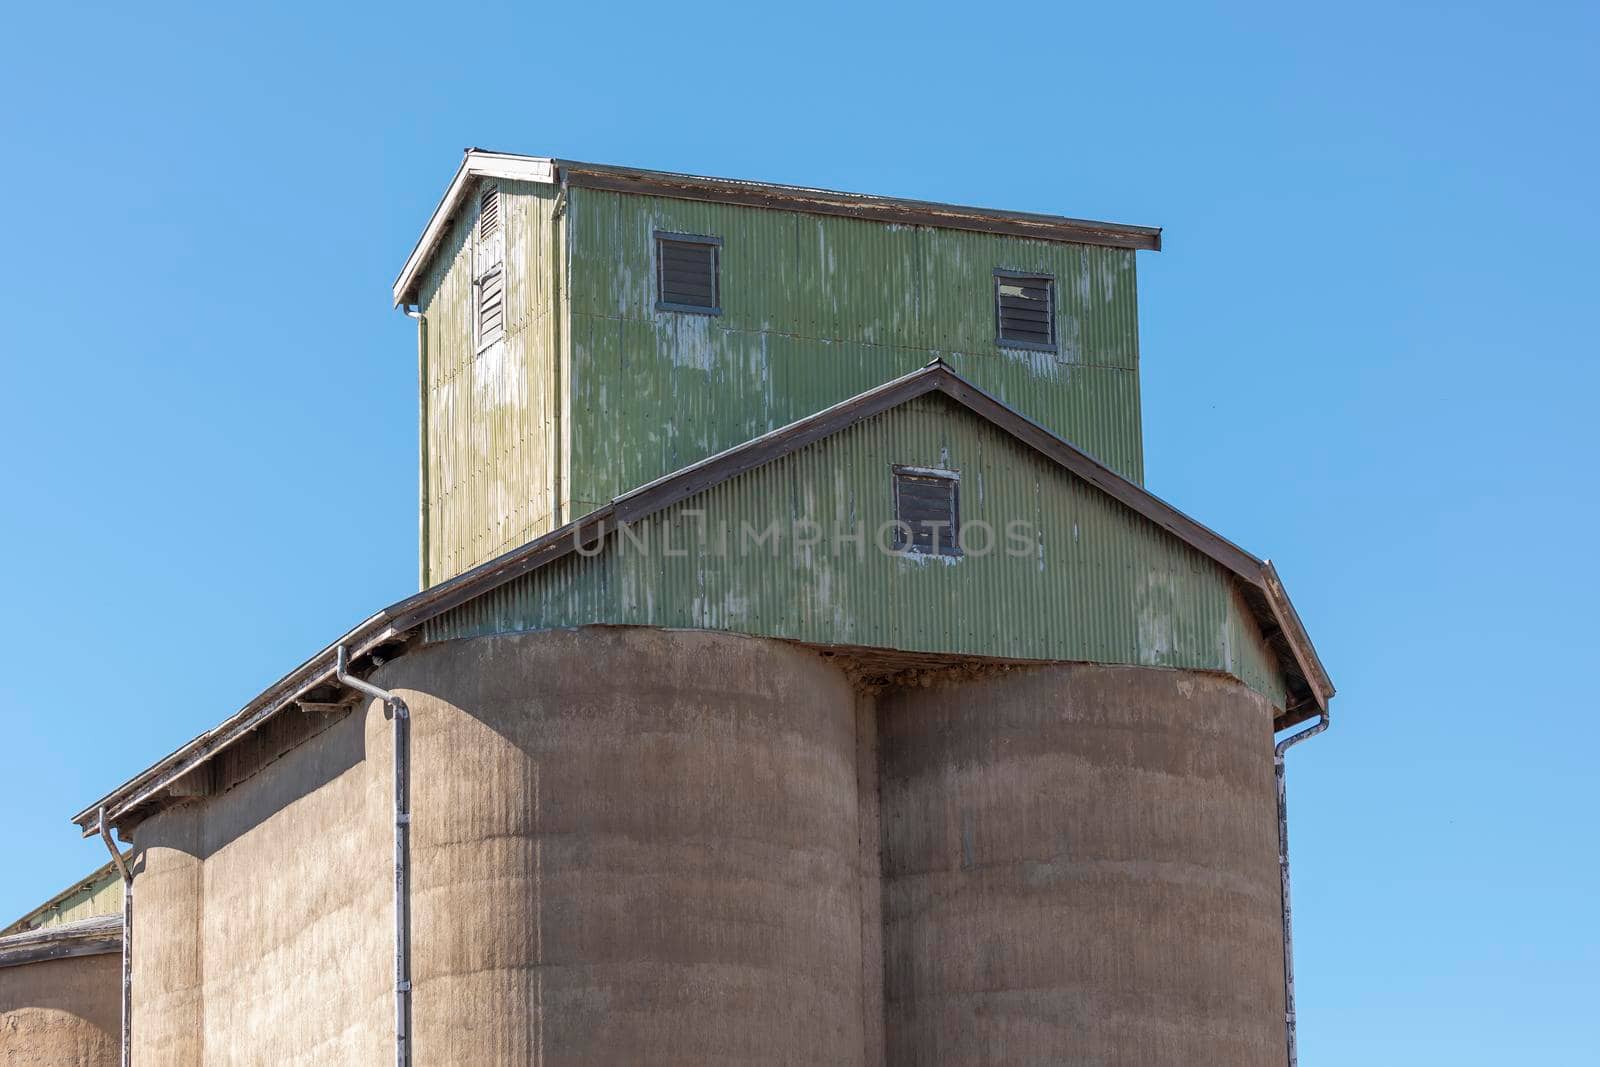 An old green building on a storage silo at a flour mill by WittkePhotos